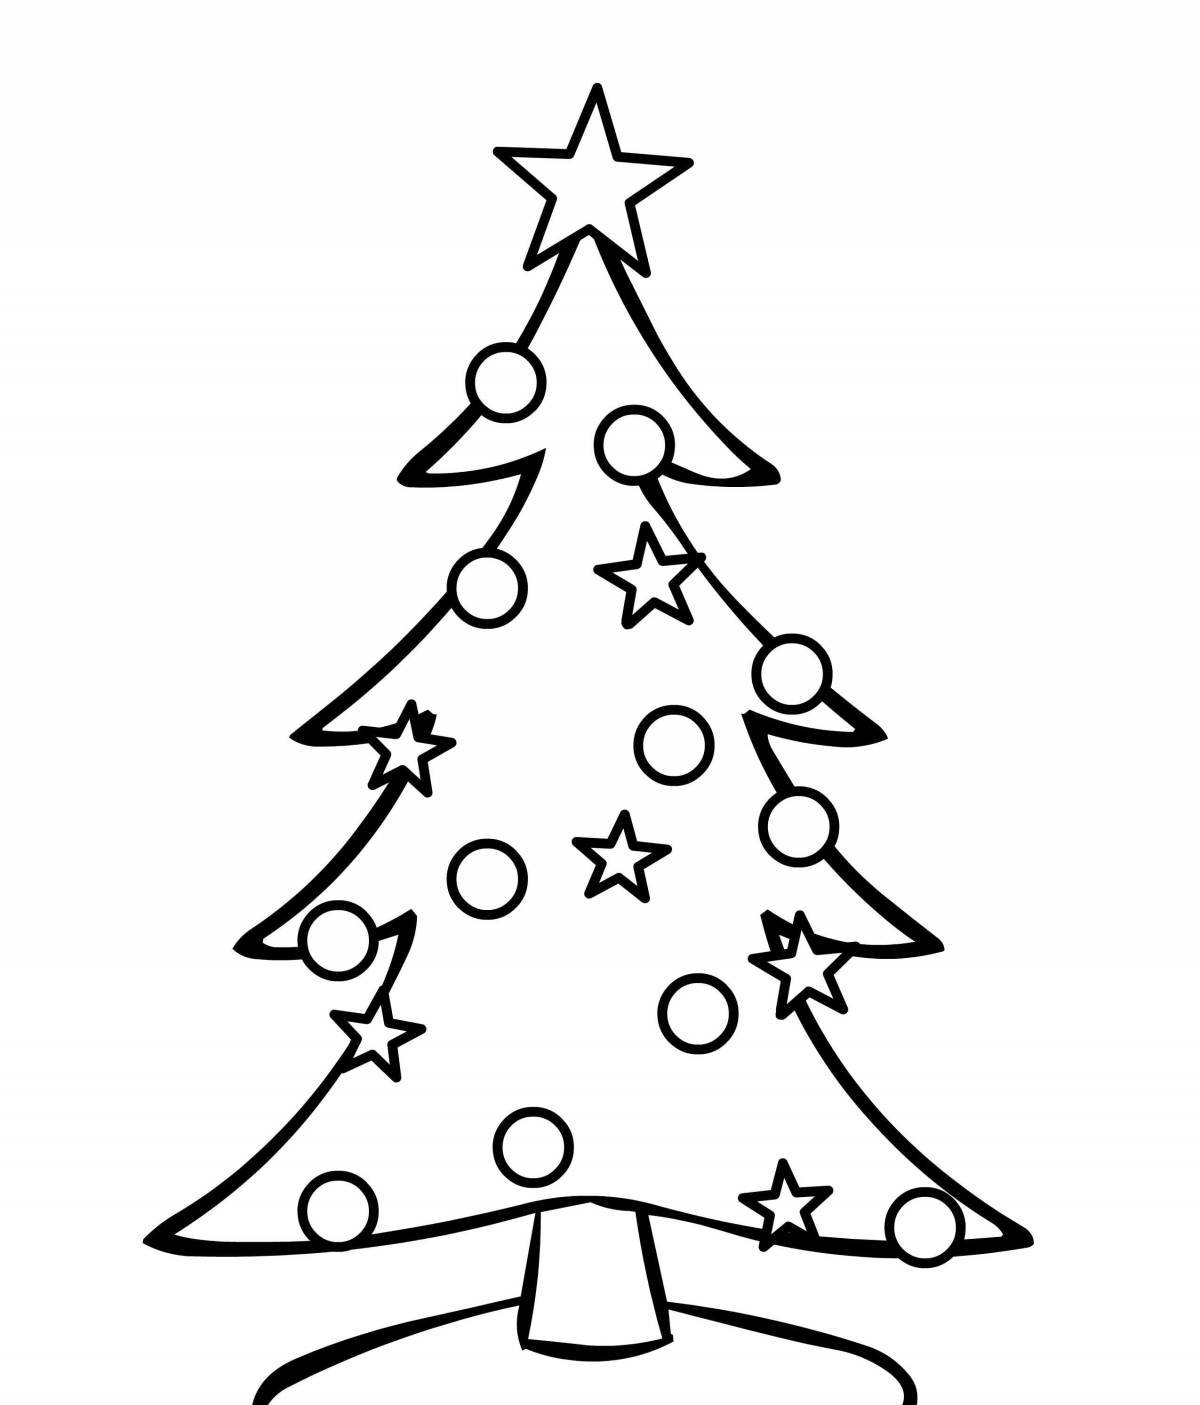 Fun coloring of the Christmas tree